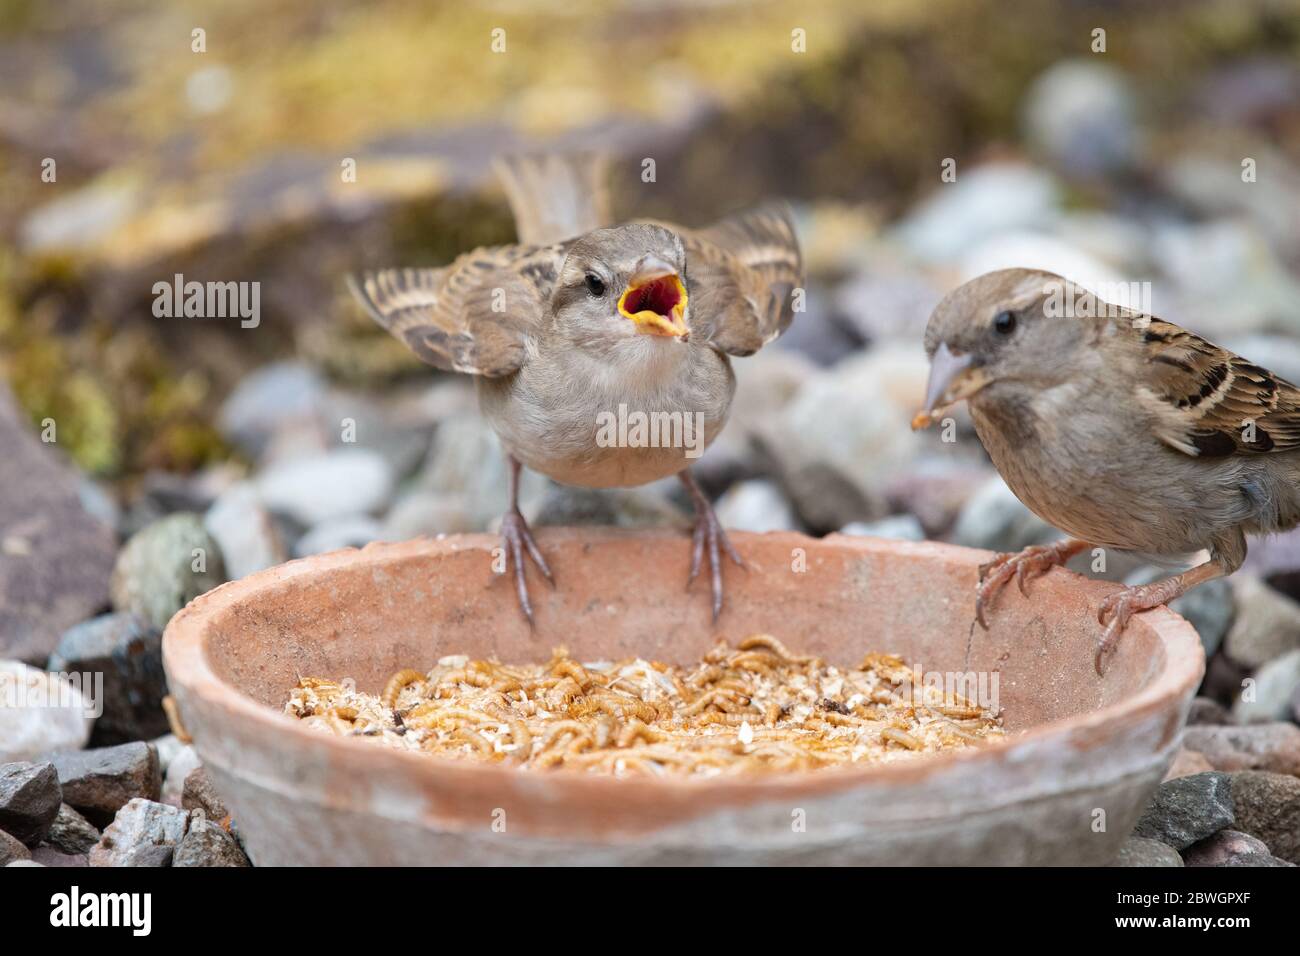 Baby house sparrow (Passer domesticus) standing on a bowl of mealworms begging for food from female - Scotland, UK Stock Photo